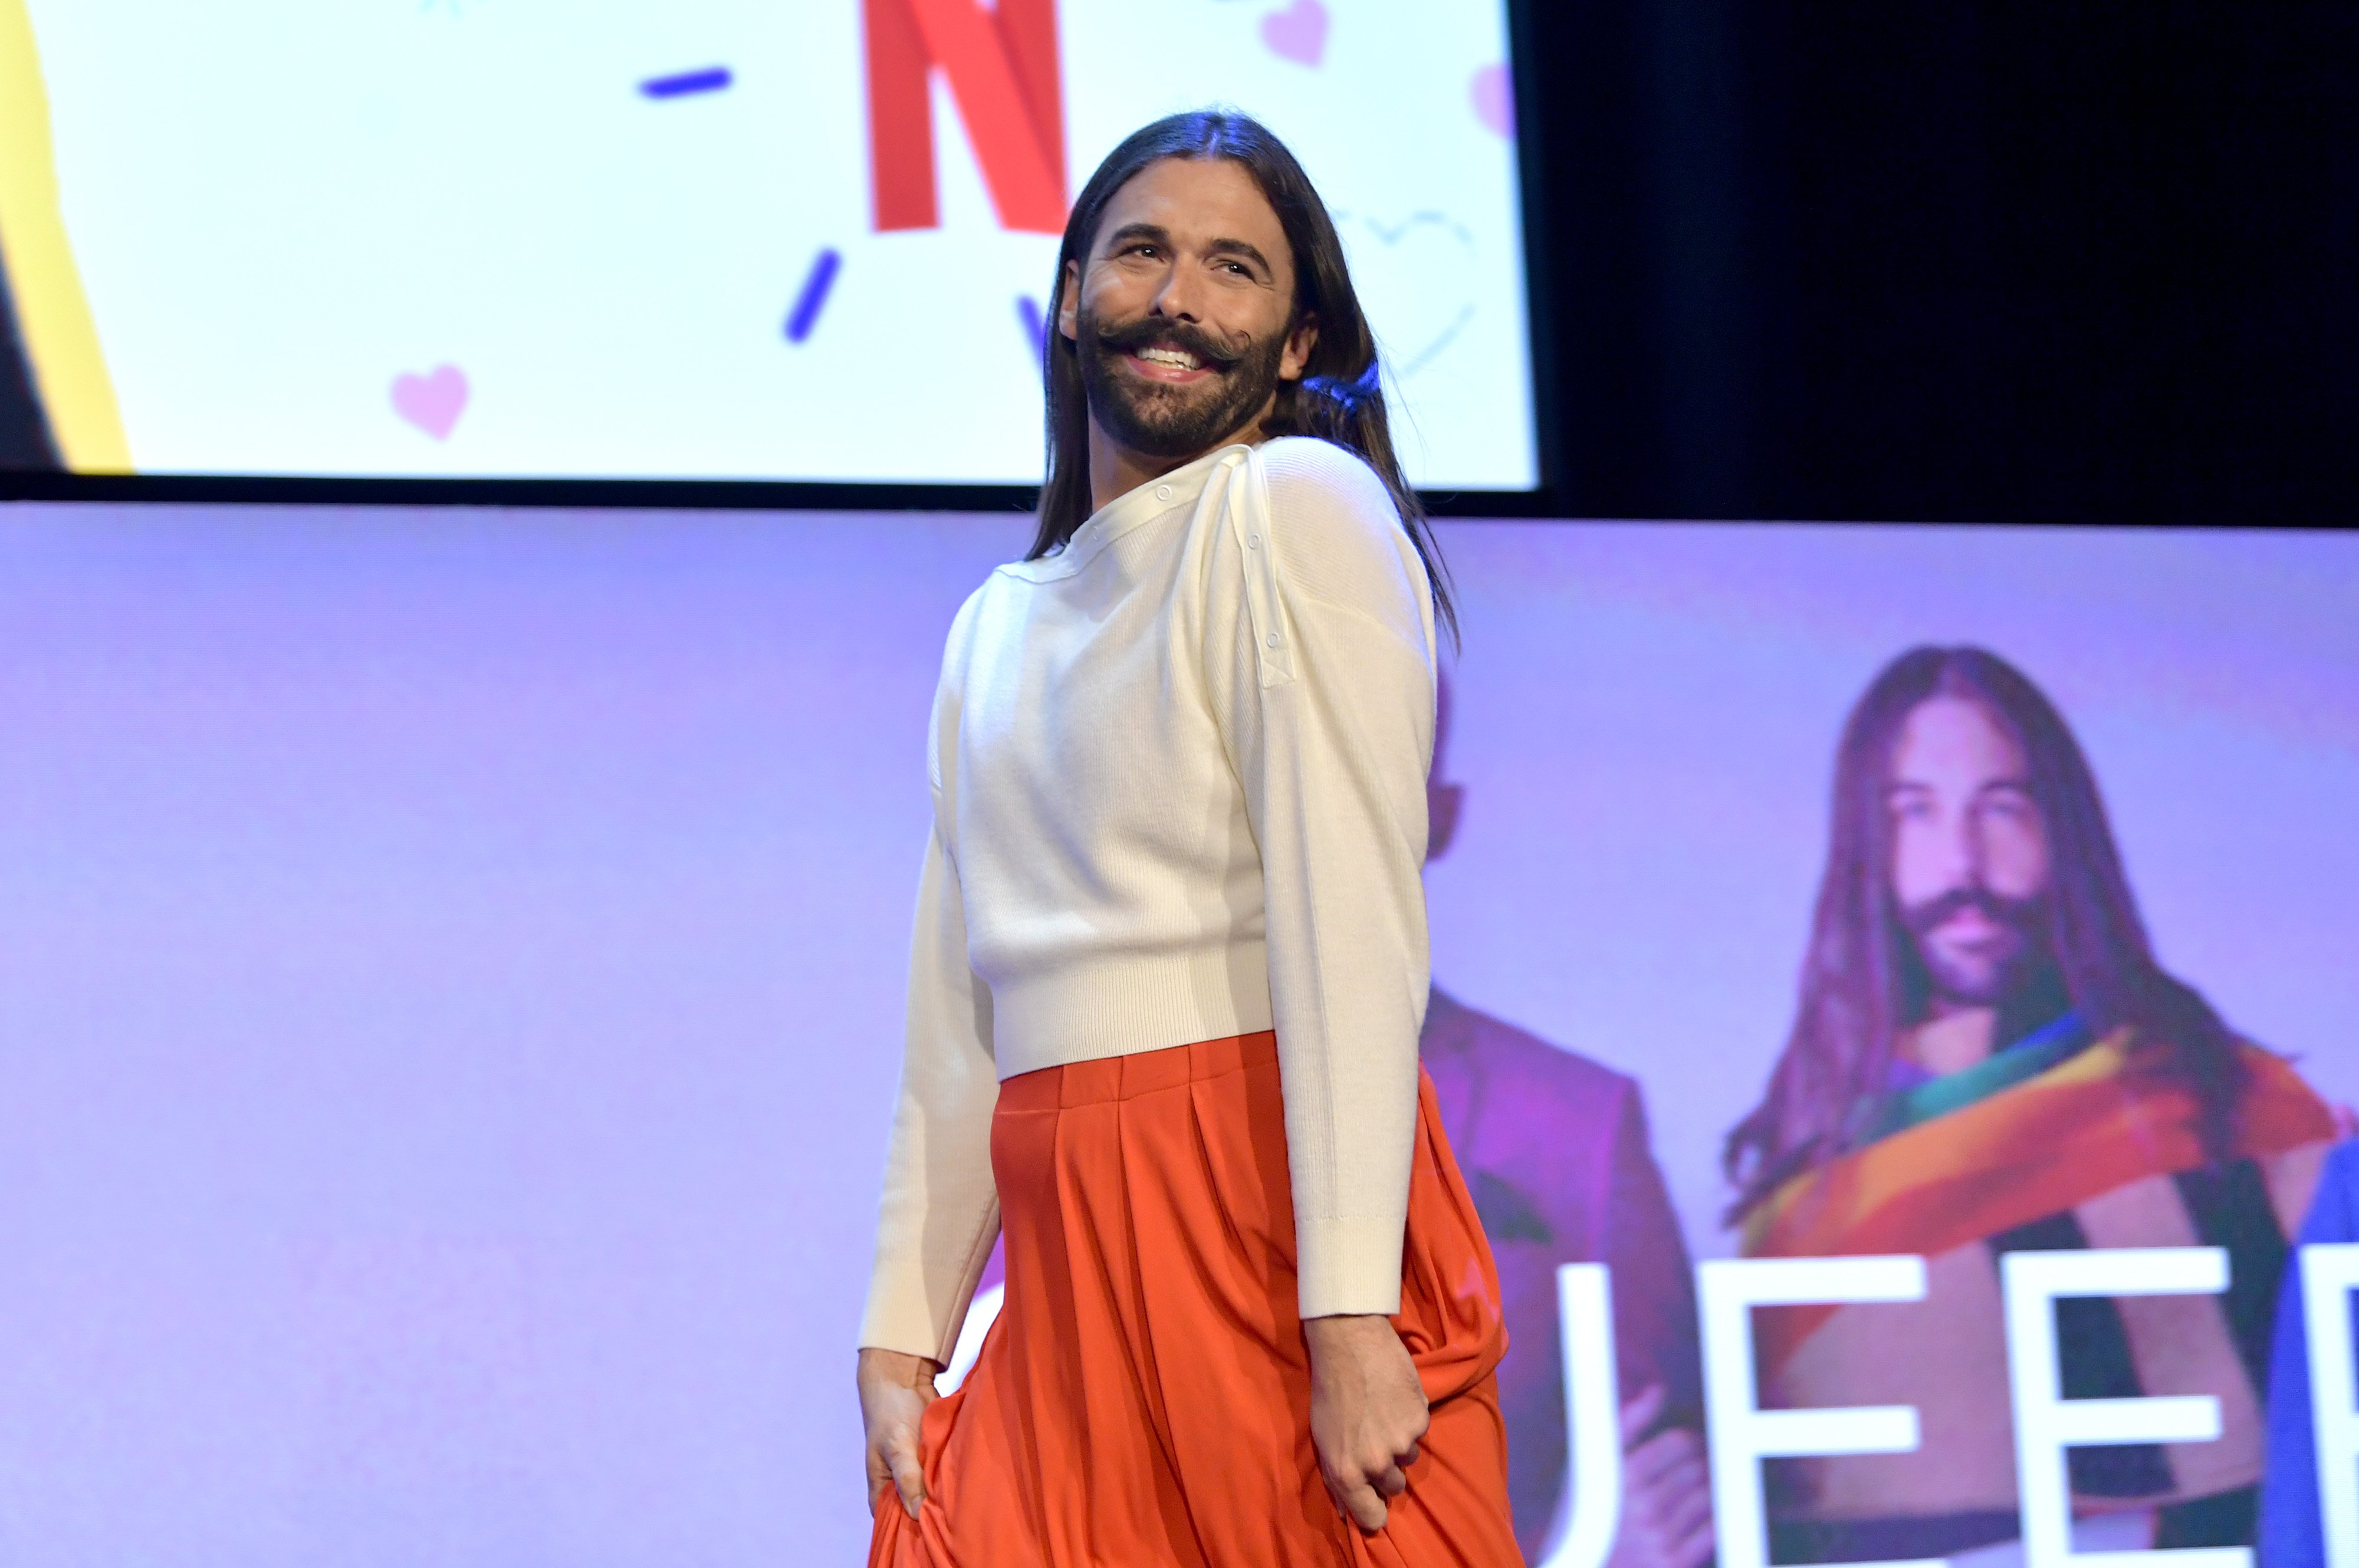 Jonathan Van Ness speaks on stage during the Netflix FYSEE 'Queer Eye' panel and reception